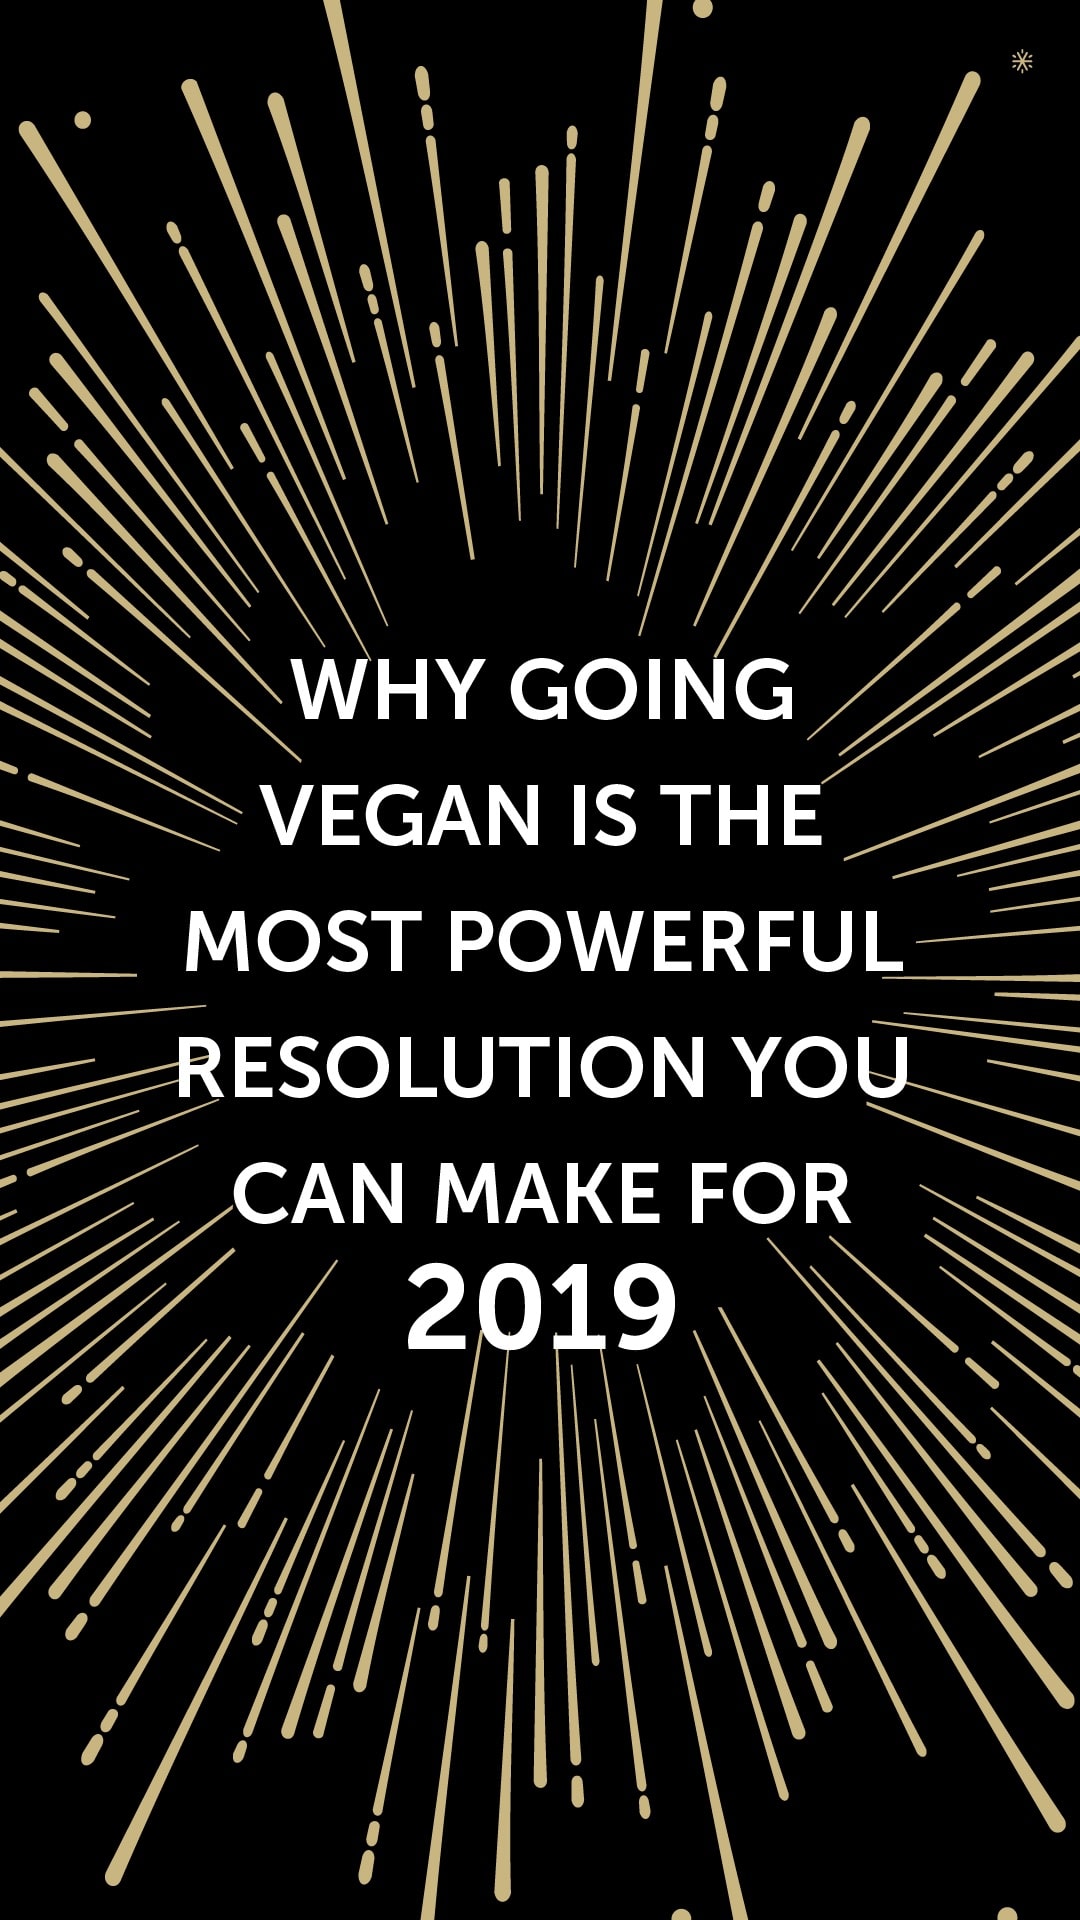 Why Going Vegan Is the Most Powerful Resolution You Can Make for 2019